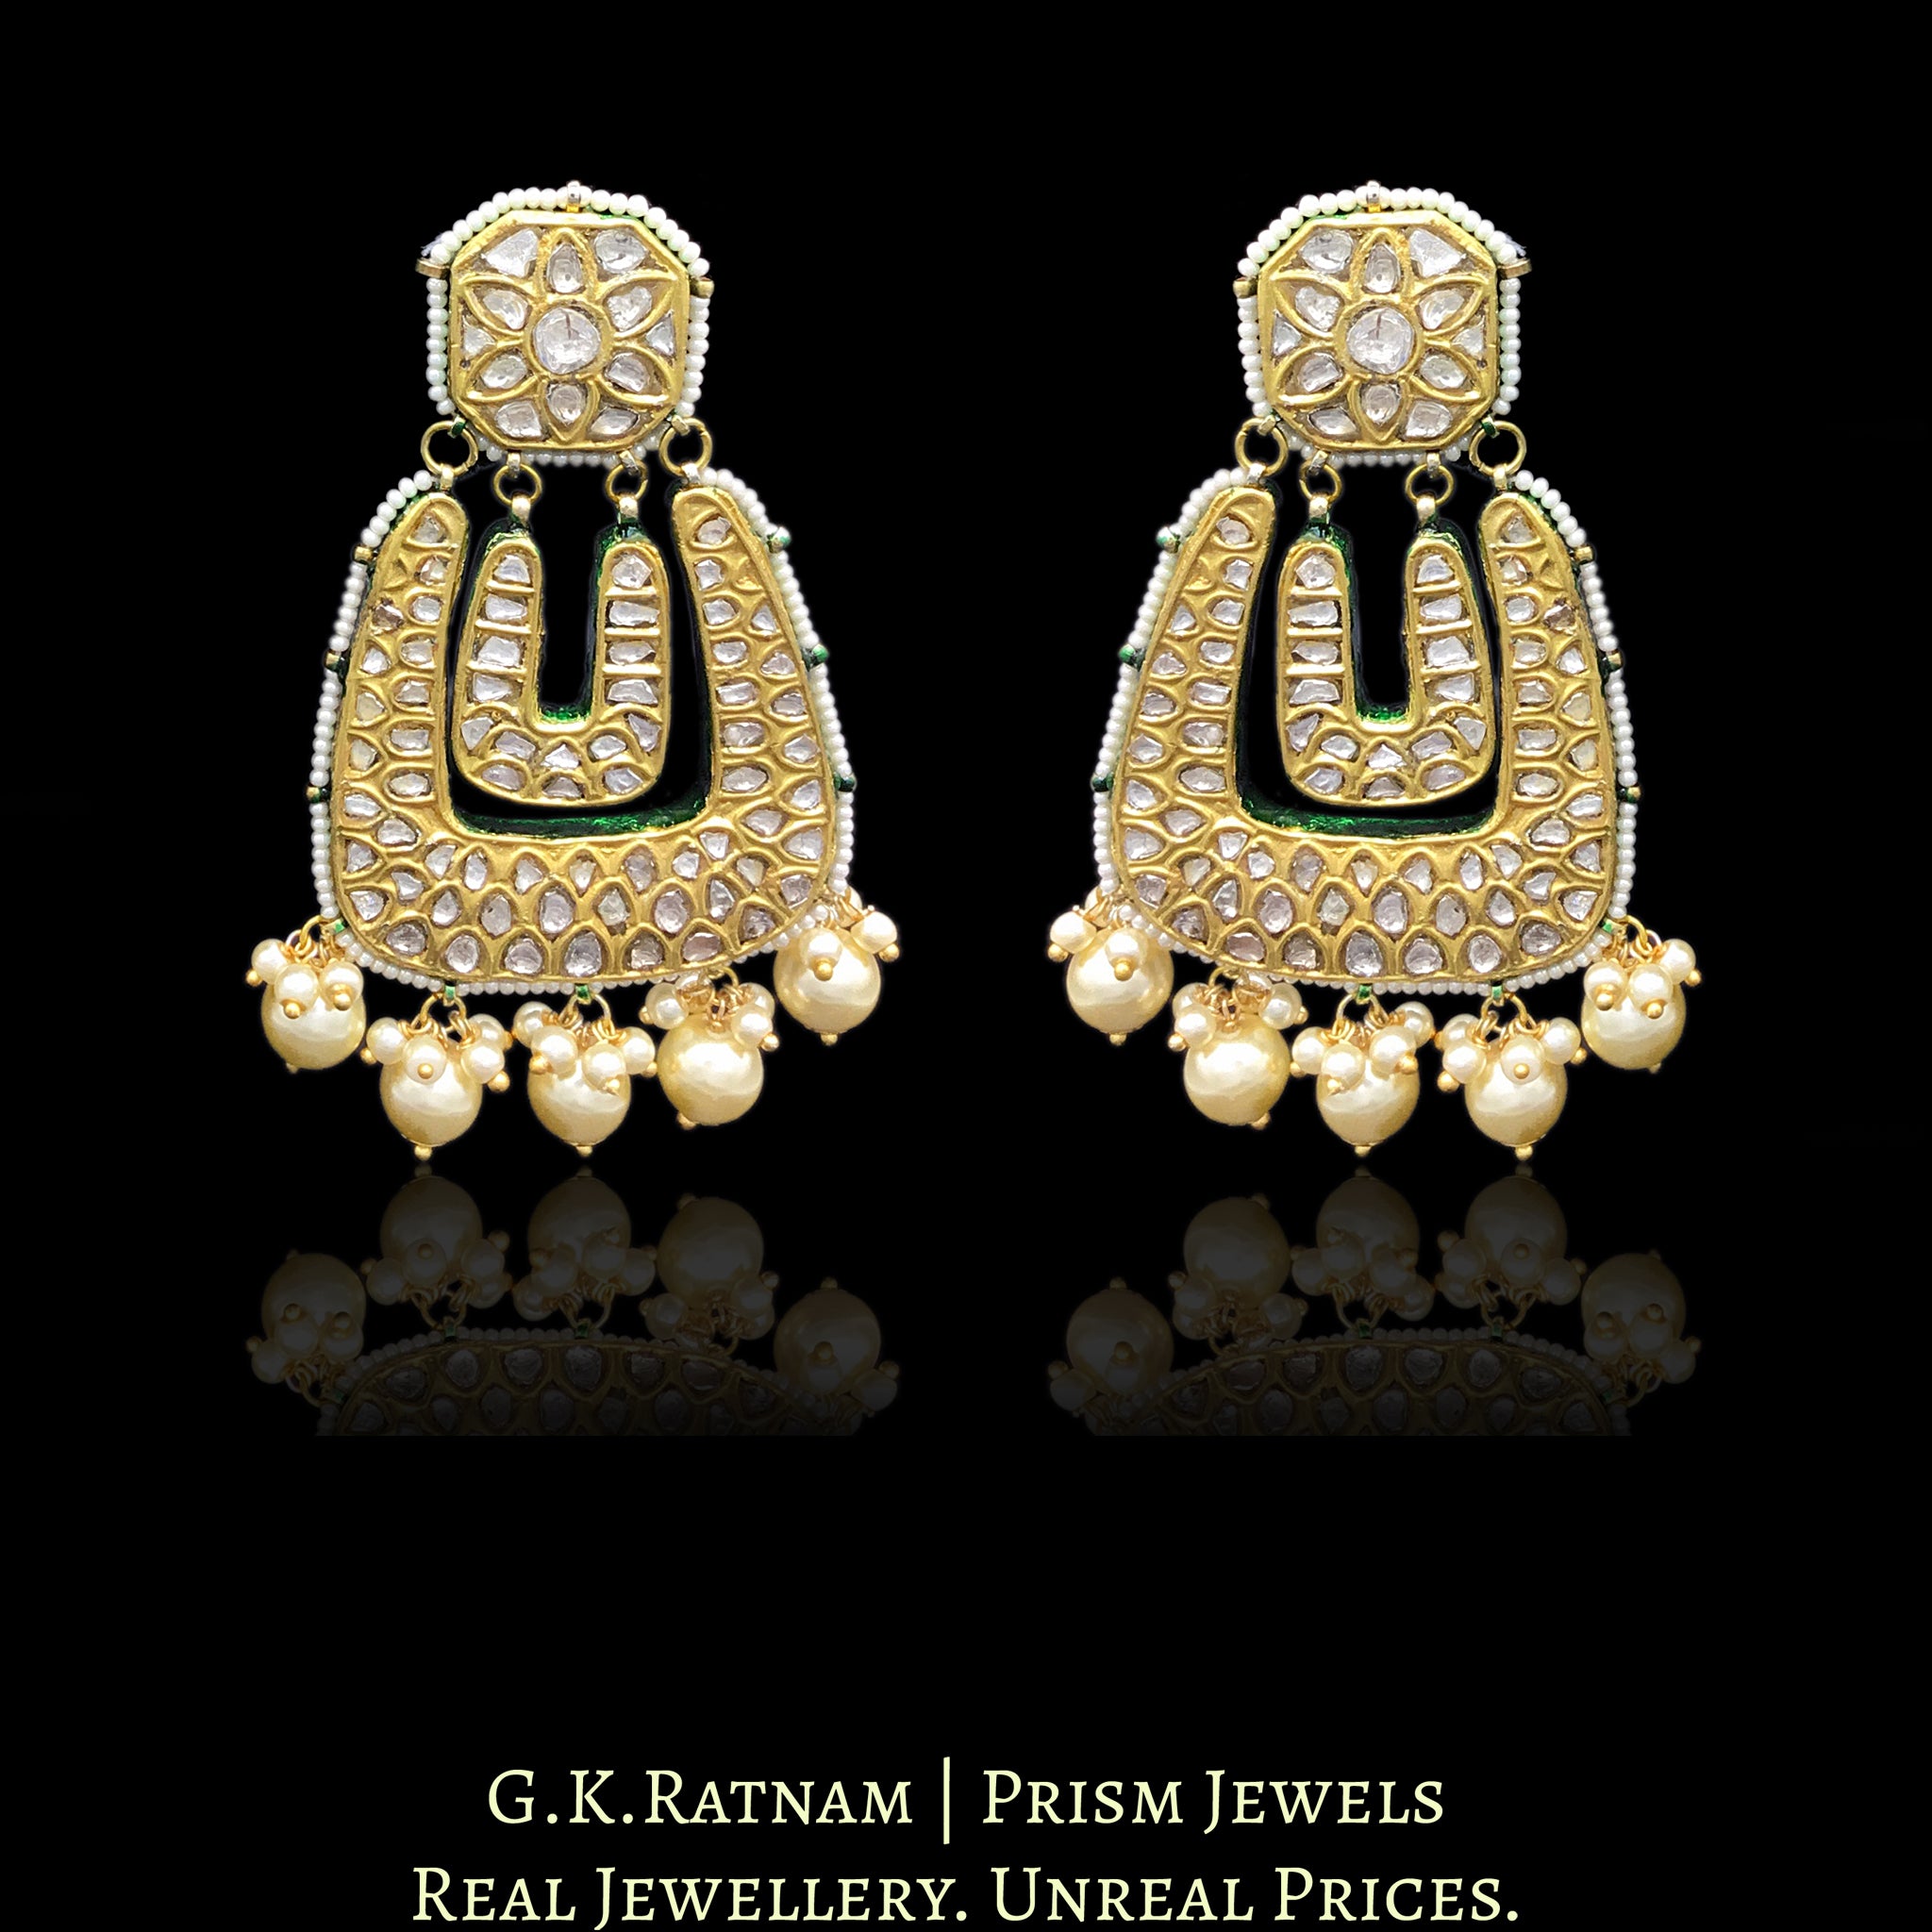 23k Gold and Diamond Polki Chand Bali Earring Pair with long U-shaped chands